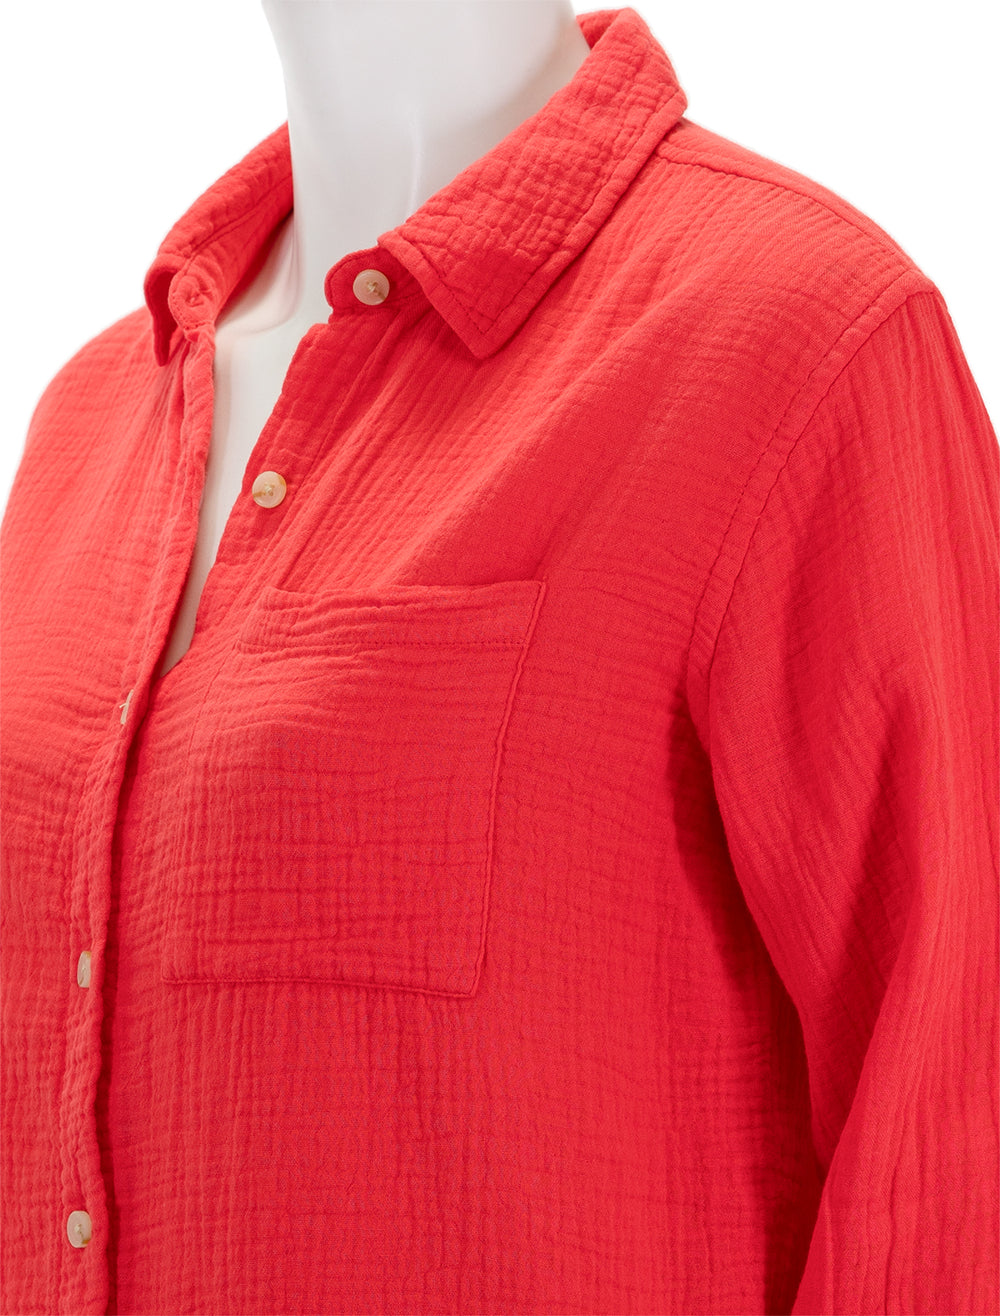 Close-up view of Marine Layer's abbey double cloth button down.